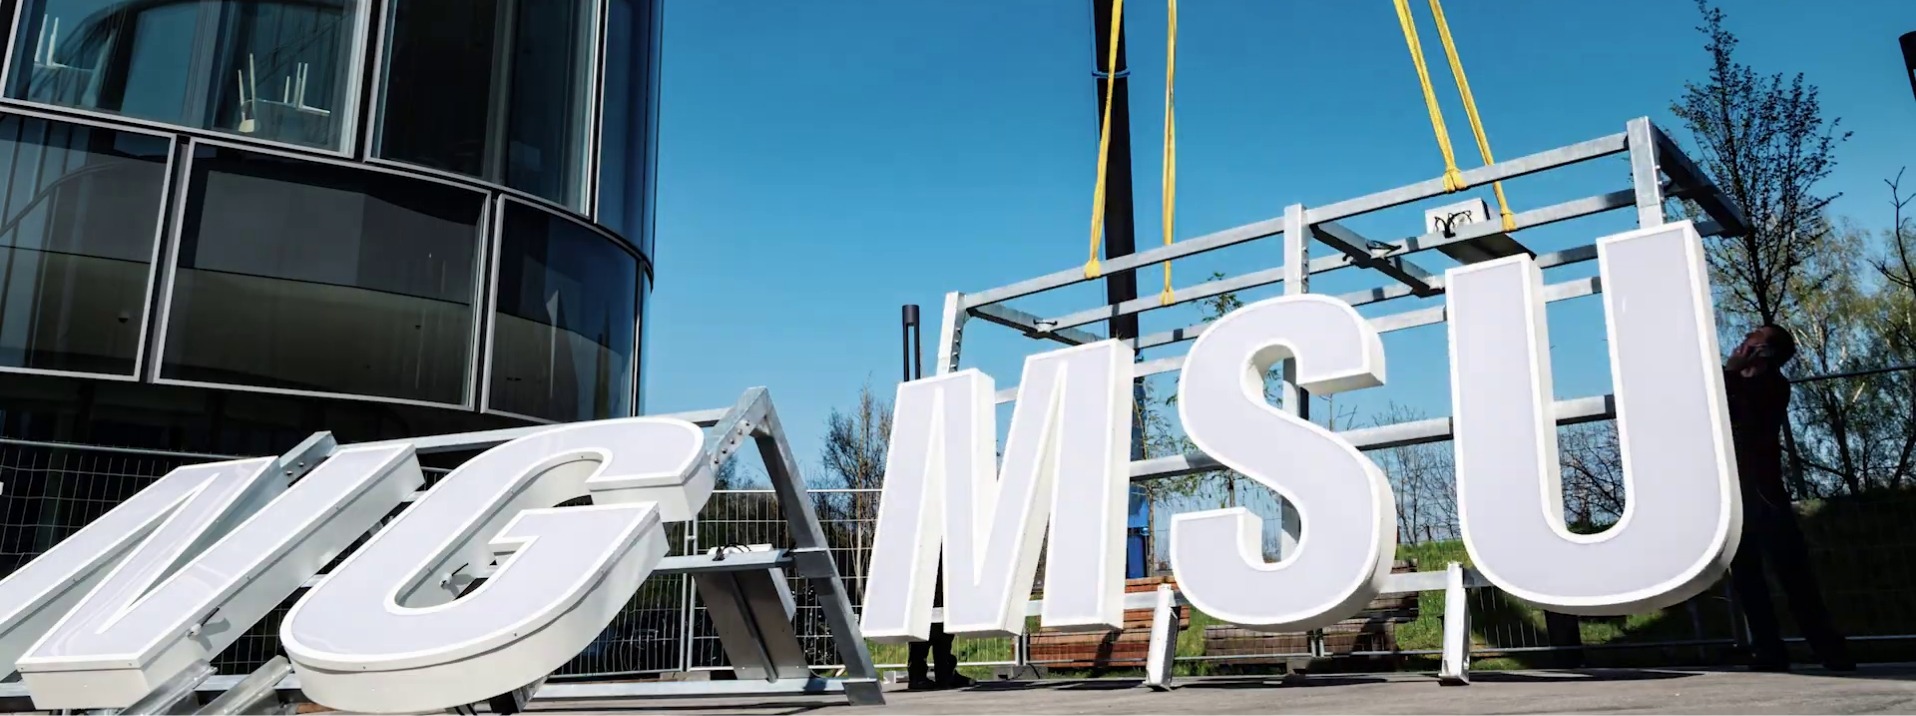 Samsung Semiconductor Europe Signage-Montage